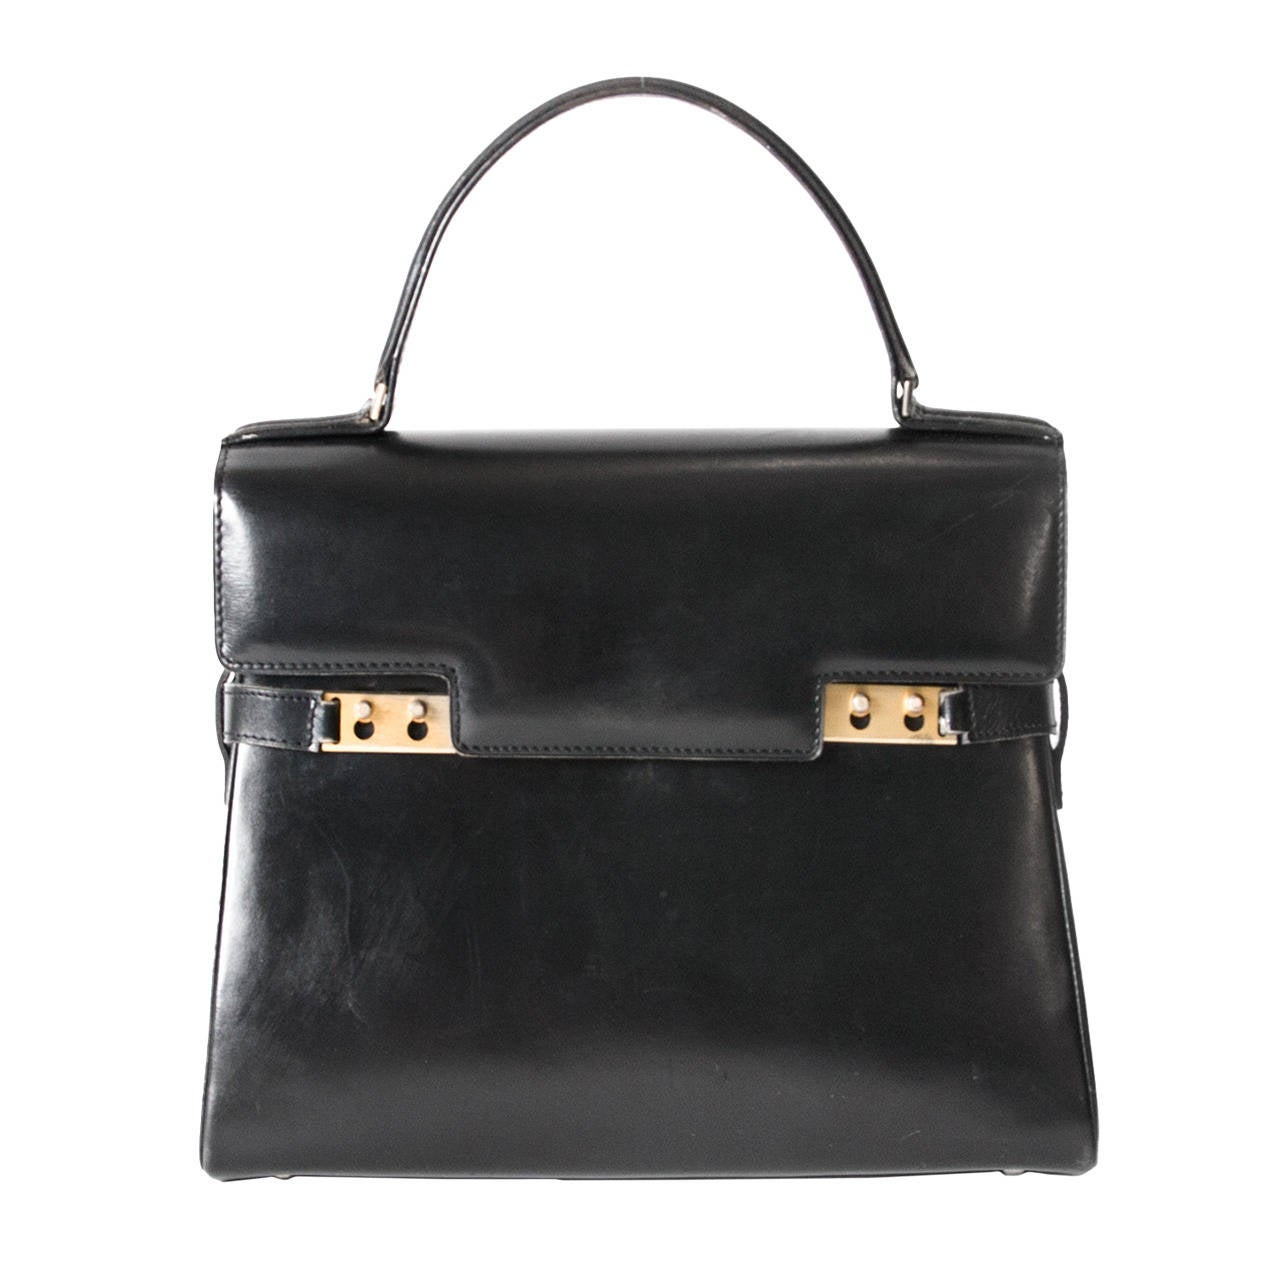 Delvaux Tempete Black at 1stdibs